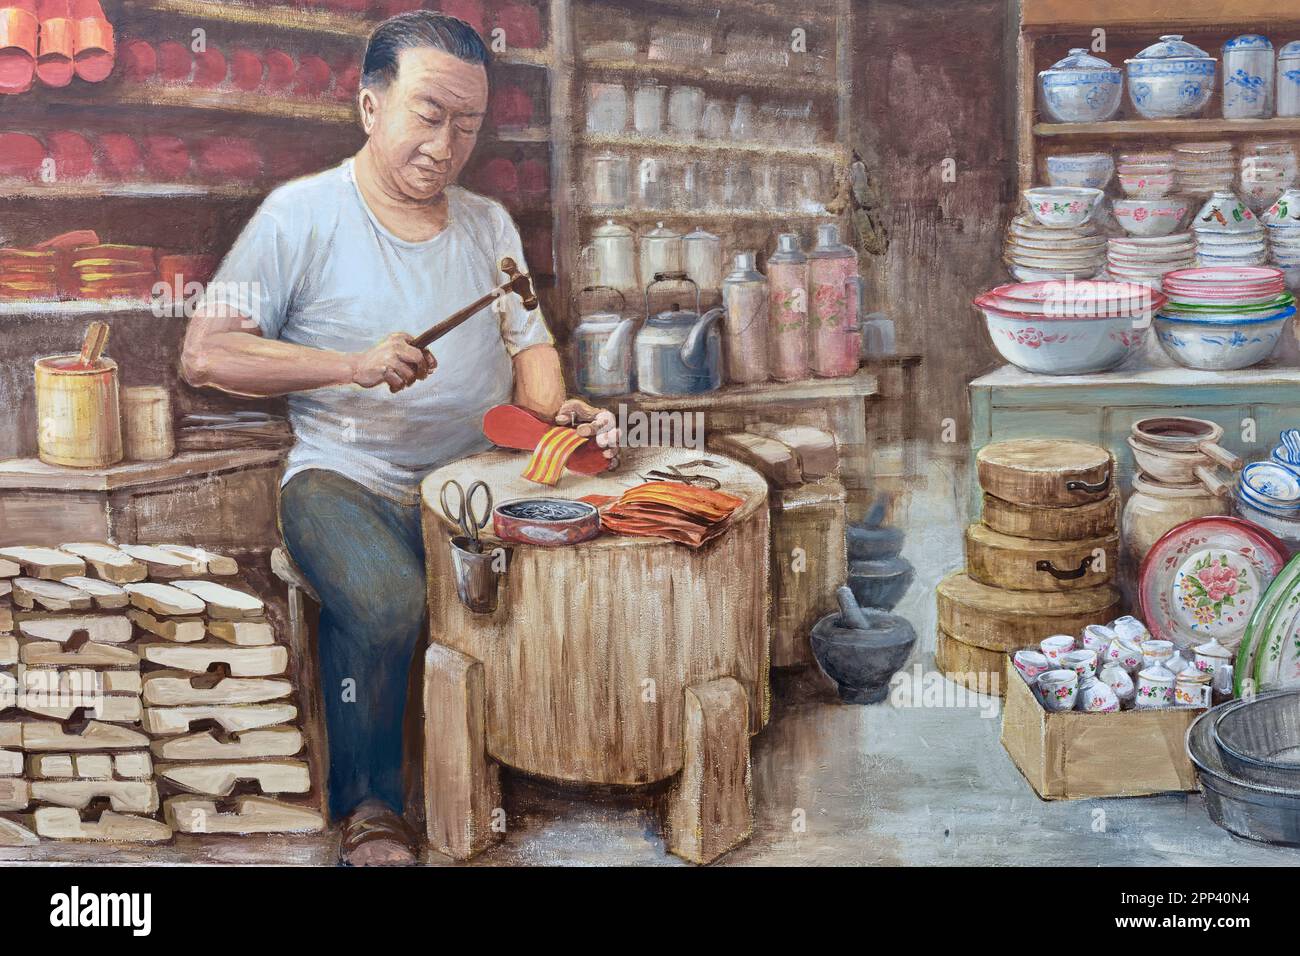 A mural by Singaporean artist Yip Yew Chong in Chinatown, Singapore, depicting a Chinese sandal maker of times gone by Stock Photo